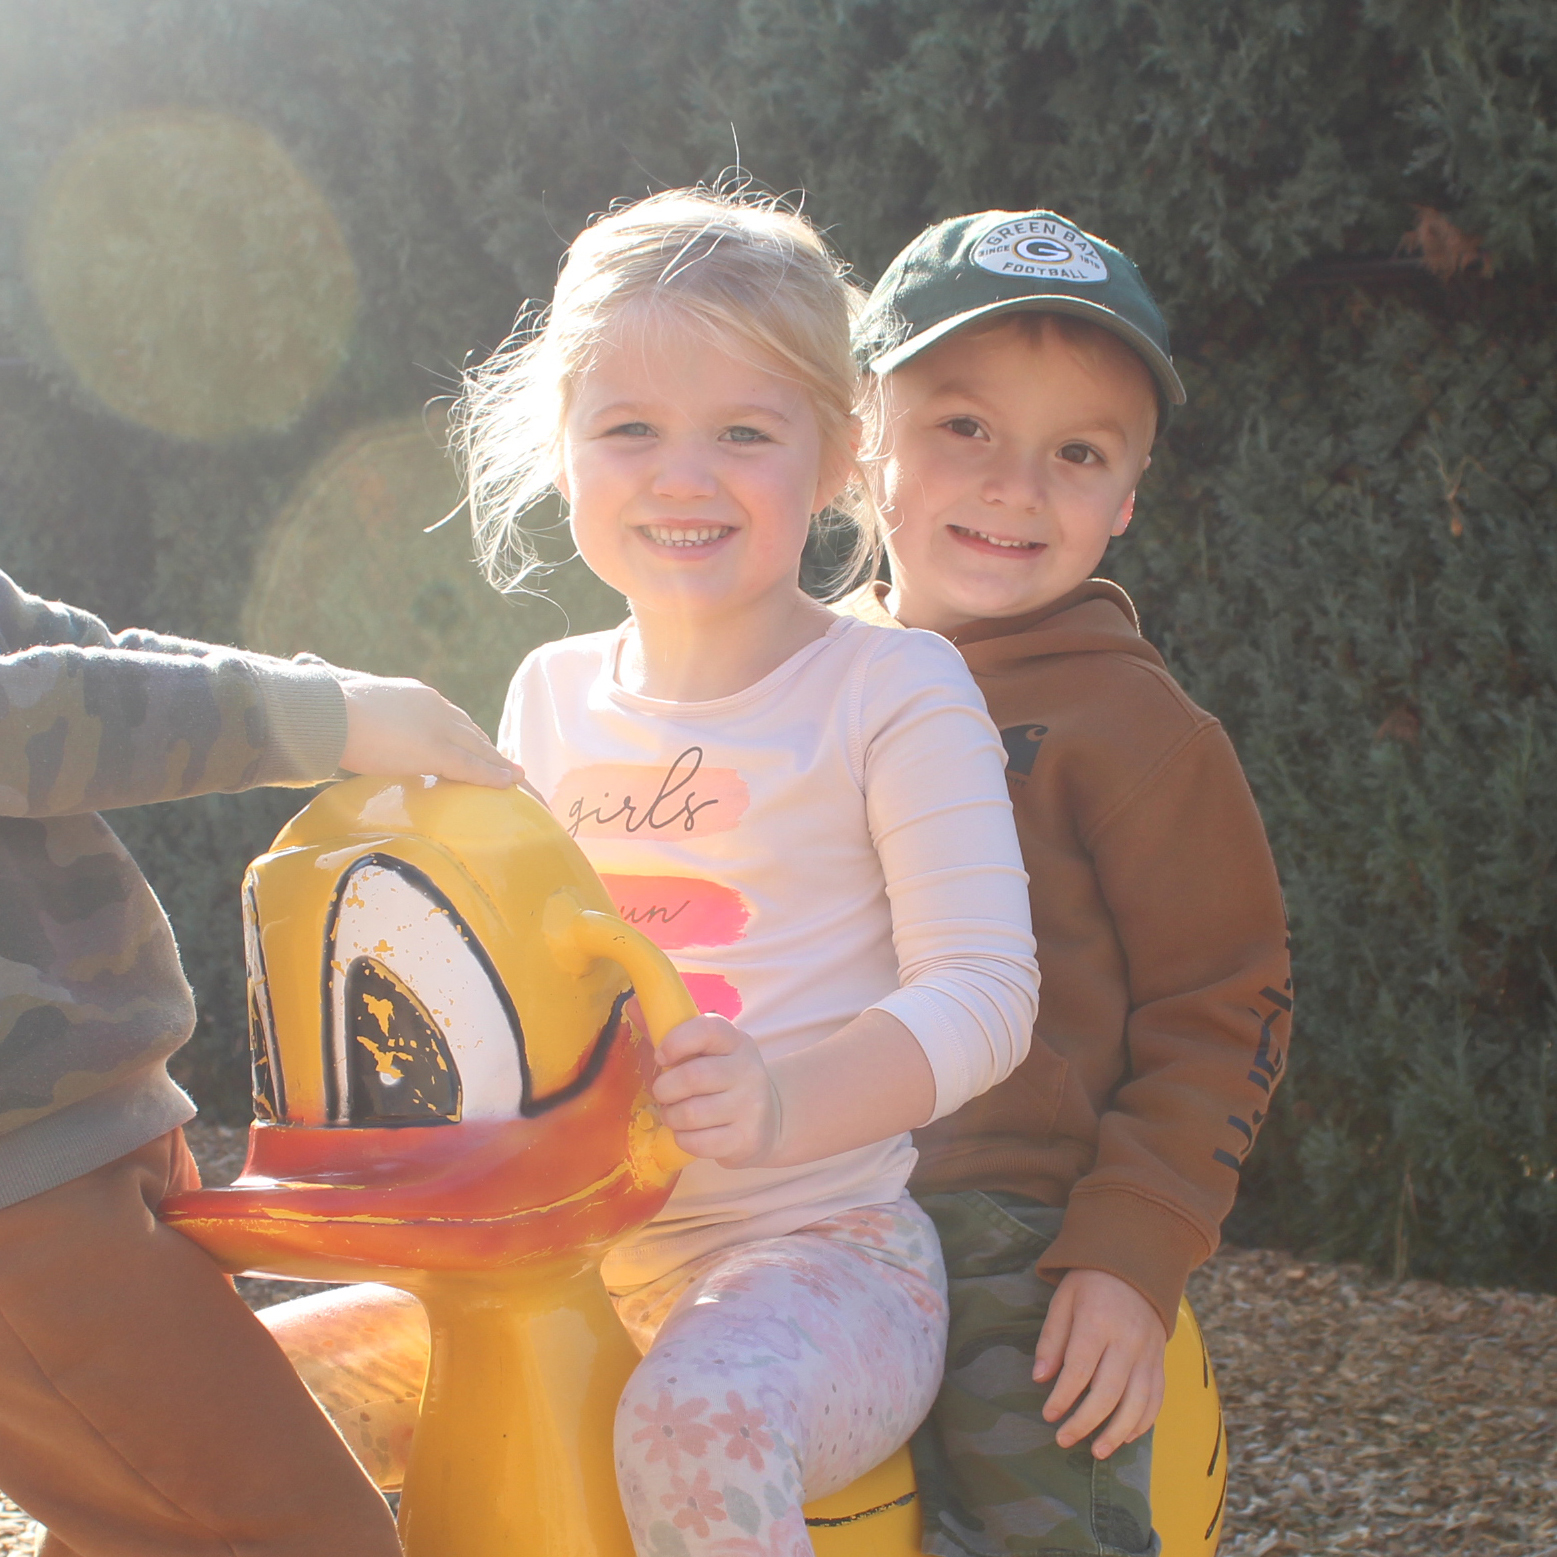 Two children smile while on a spring rider playground feature